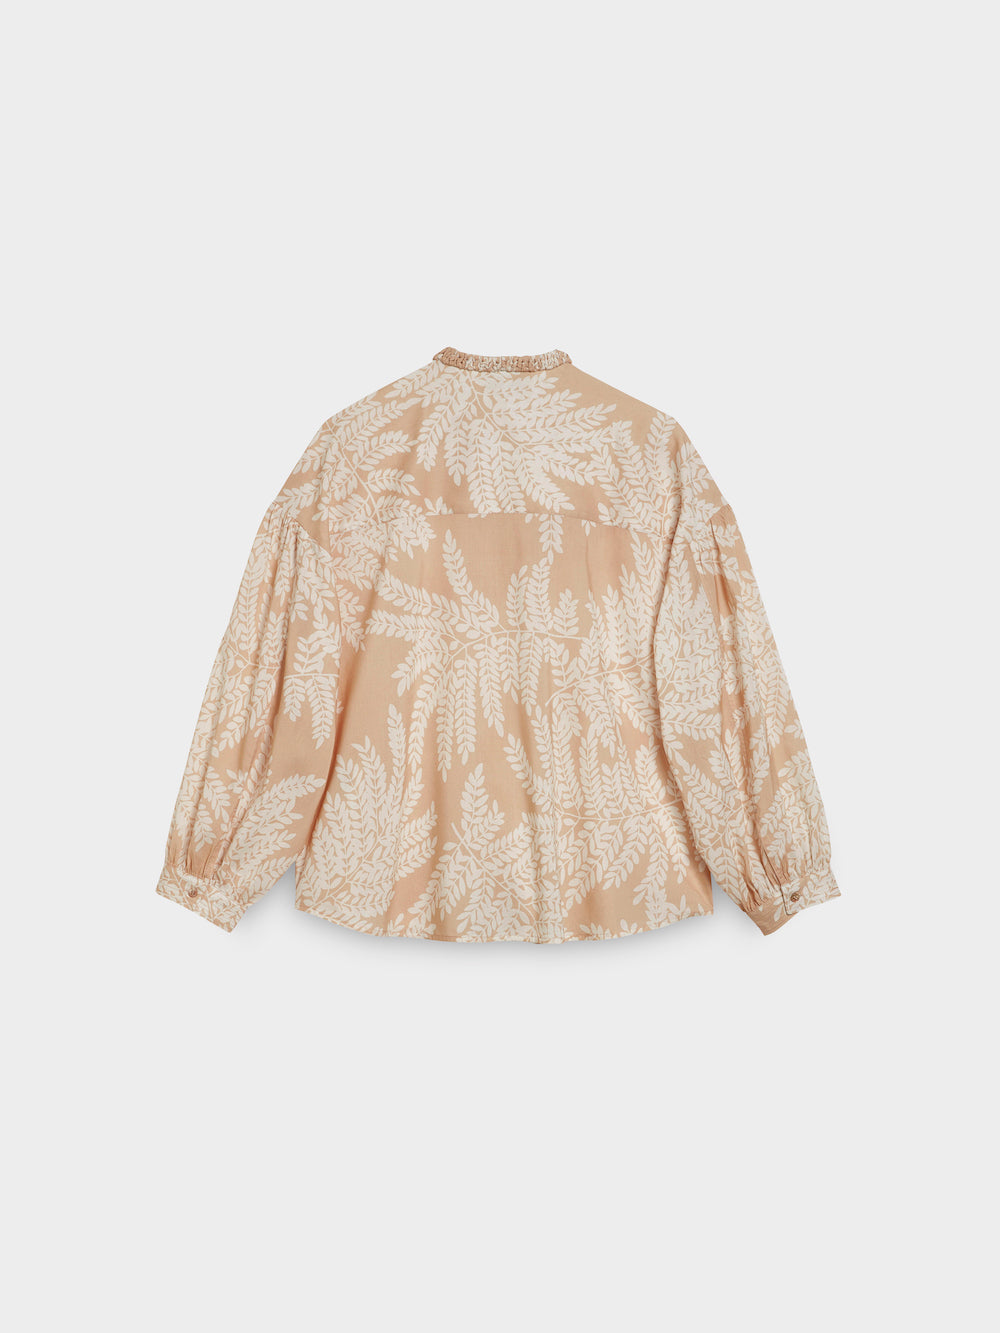 Floral Print Batiste Blouse with Macrame Collar